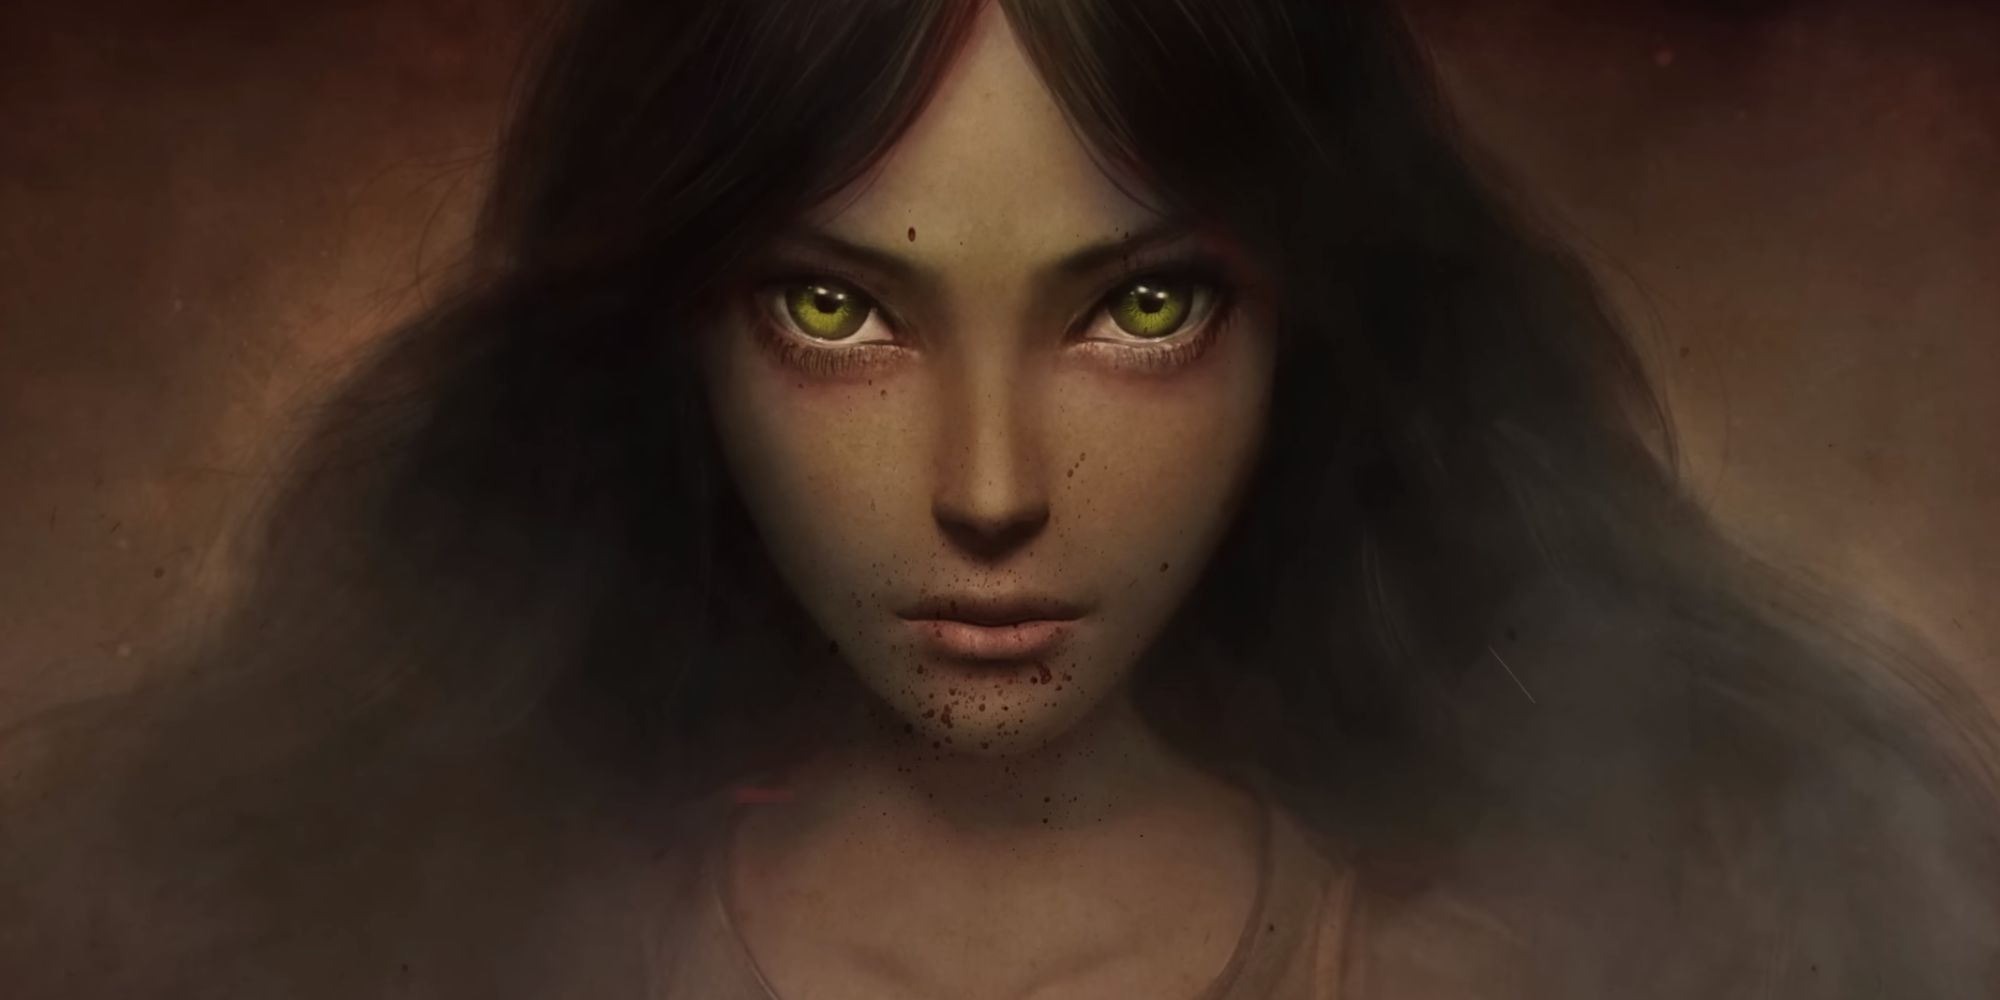 Alice, the protagonist of Alice: Asylum, looks at the camera with bright green eyes